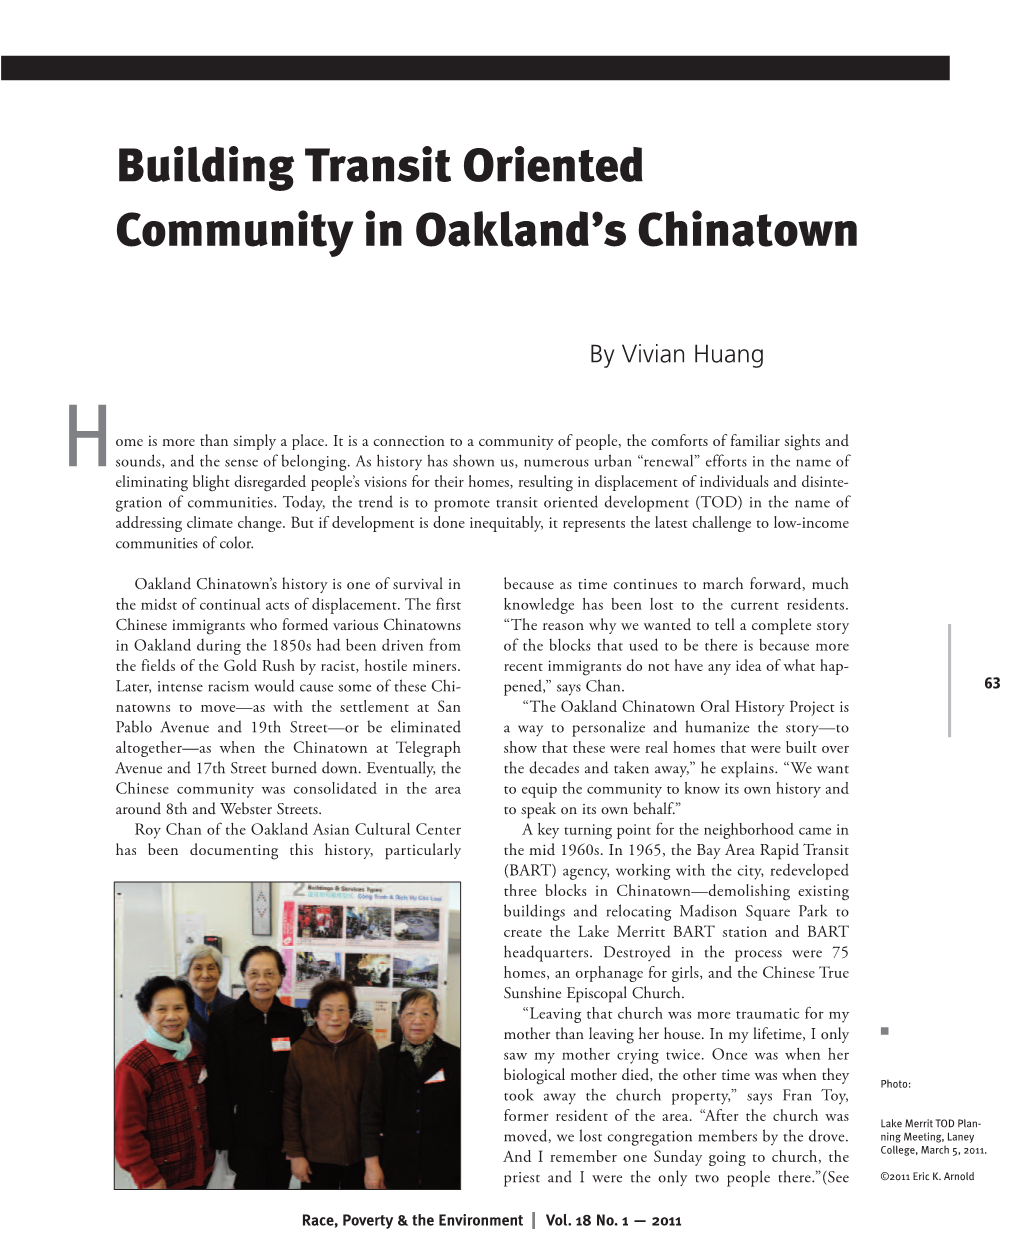 Building Transit Oriented Community in Oakland's Chinatown